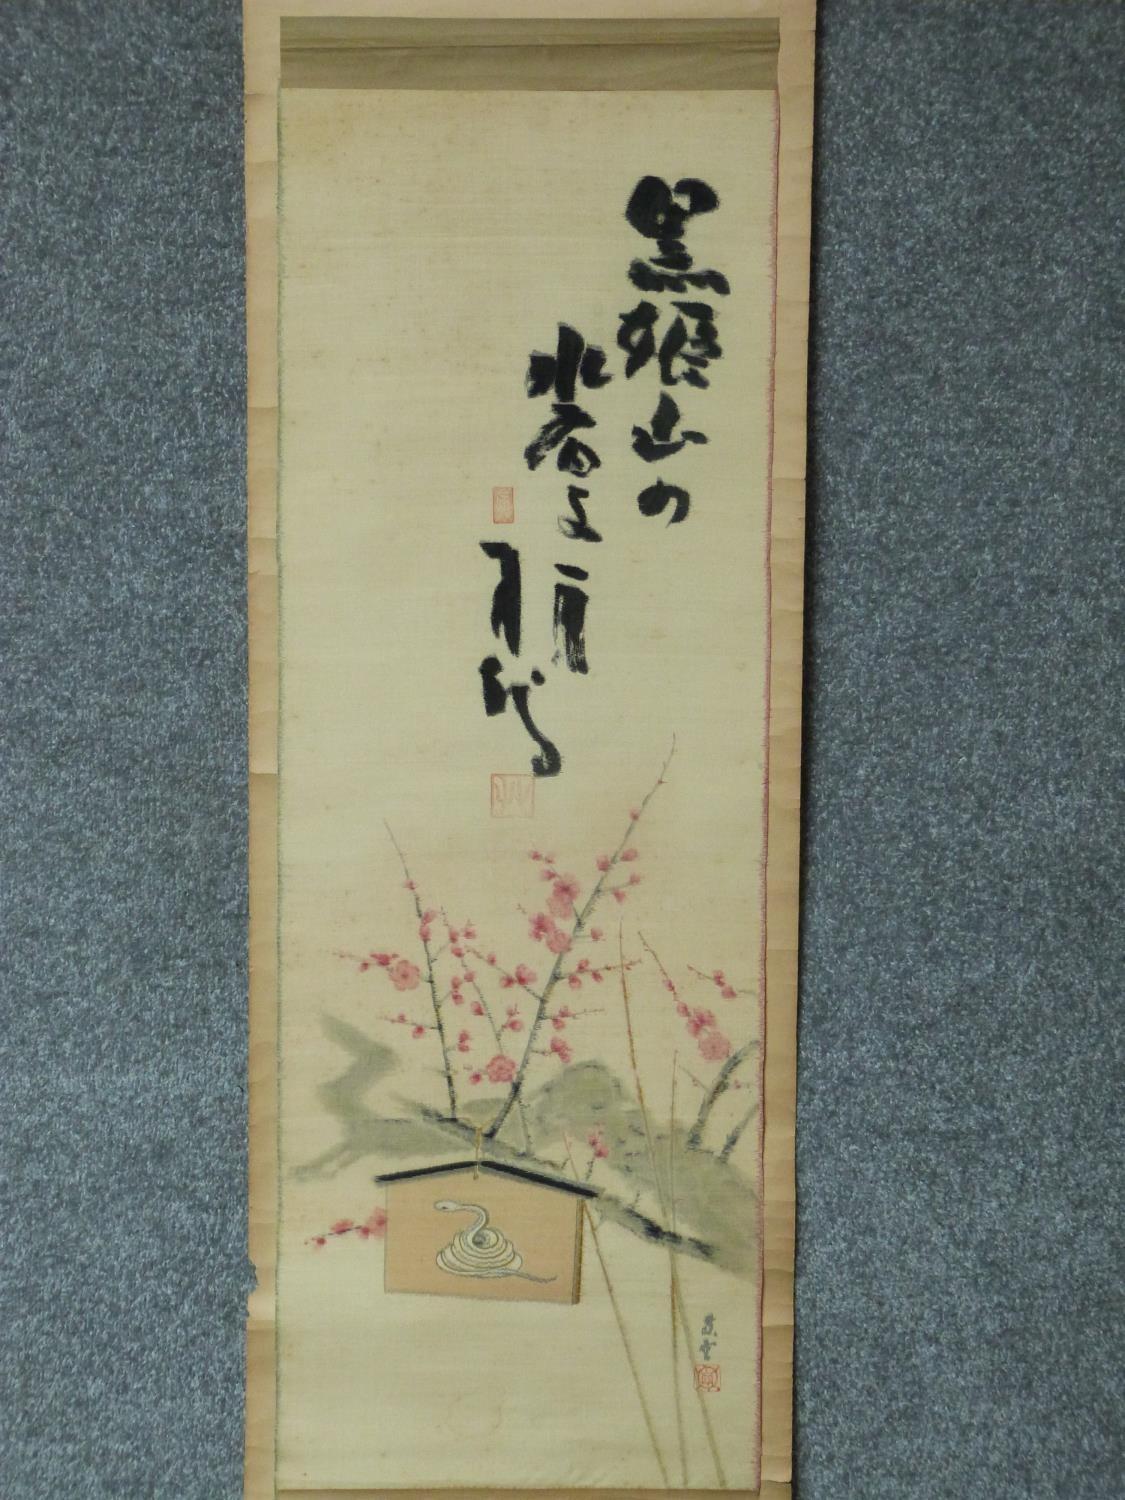 A Japanese mounted scroll, silk painting, coiled snake embroidery and cherry blossom, signed. - Image 2 of 16